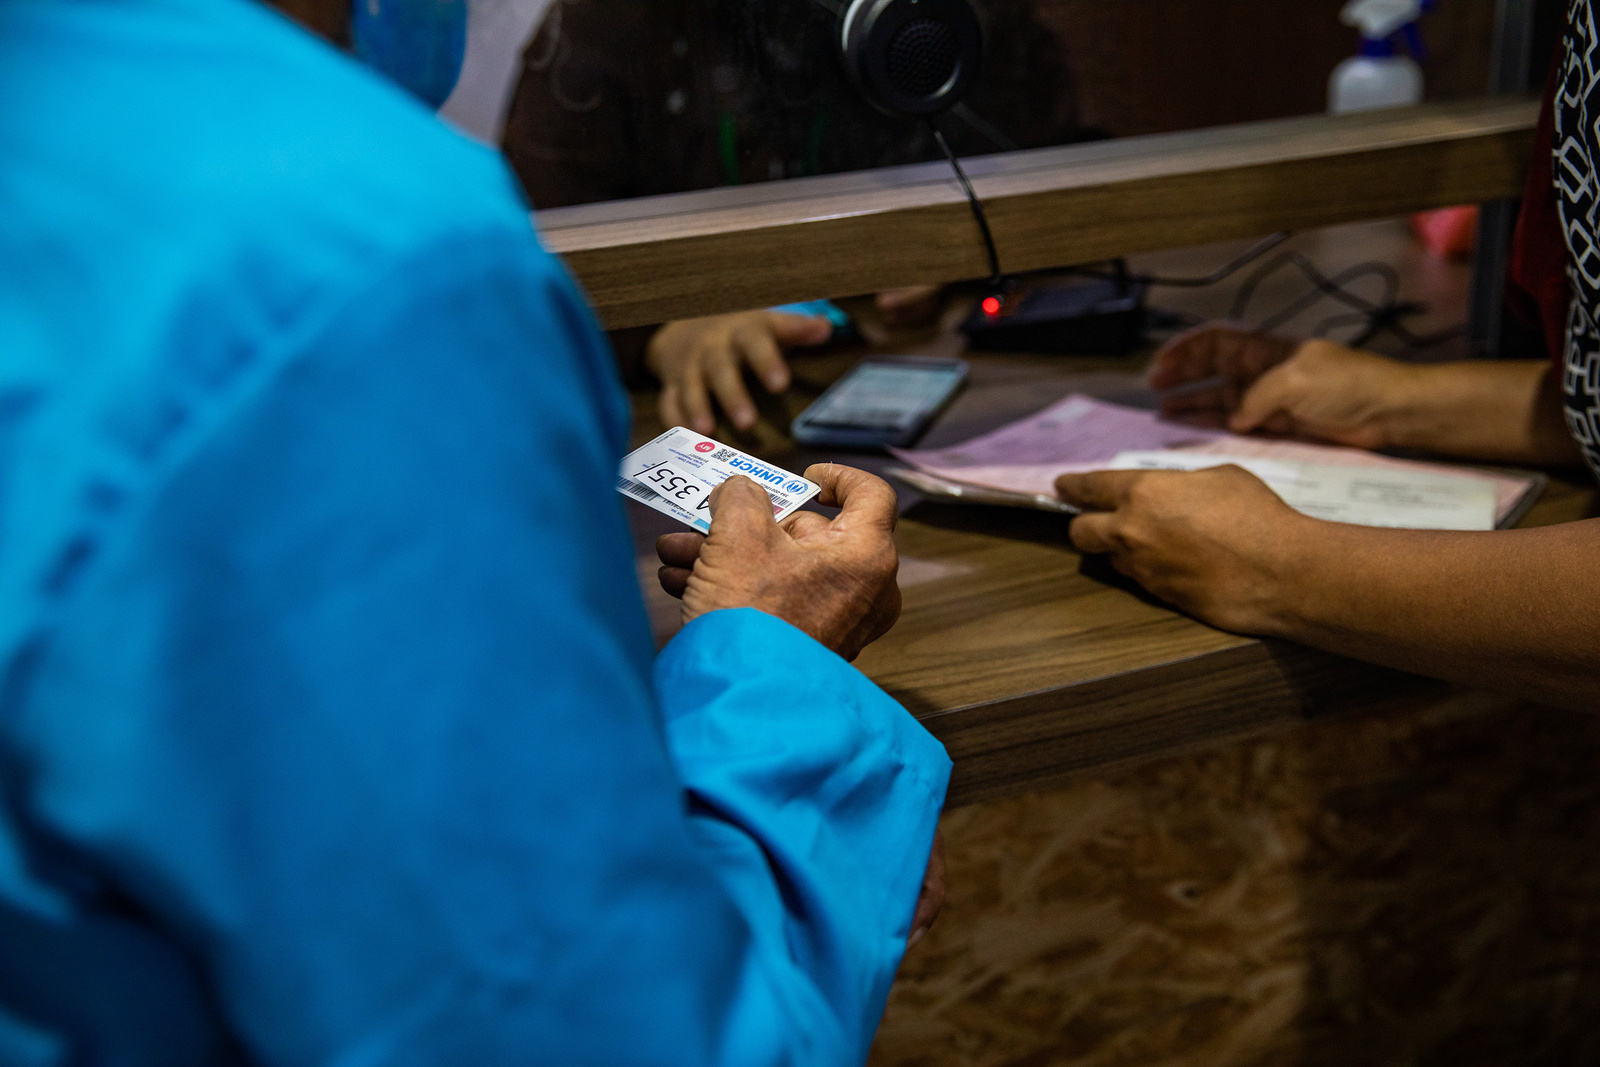 For refugees in Malaysia, UNHCR’s card is the only form of identity document they possess that identifies them as persons requiring international protection, and should not be deported to a country where their lives or freedom may be at risk.